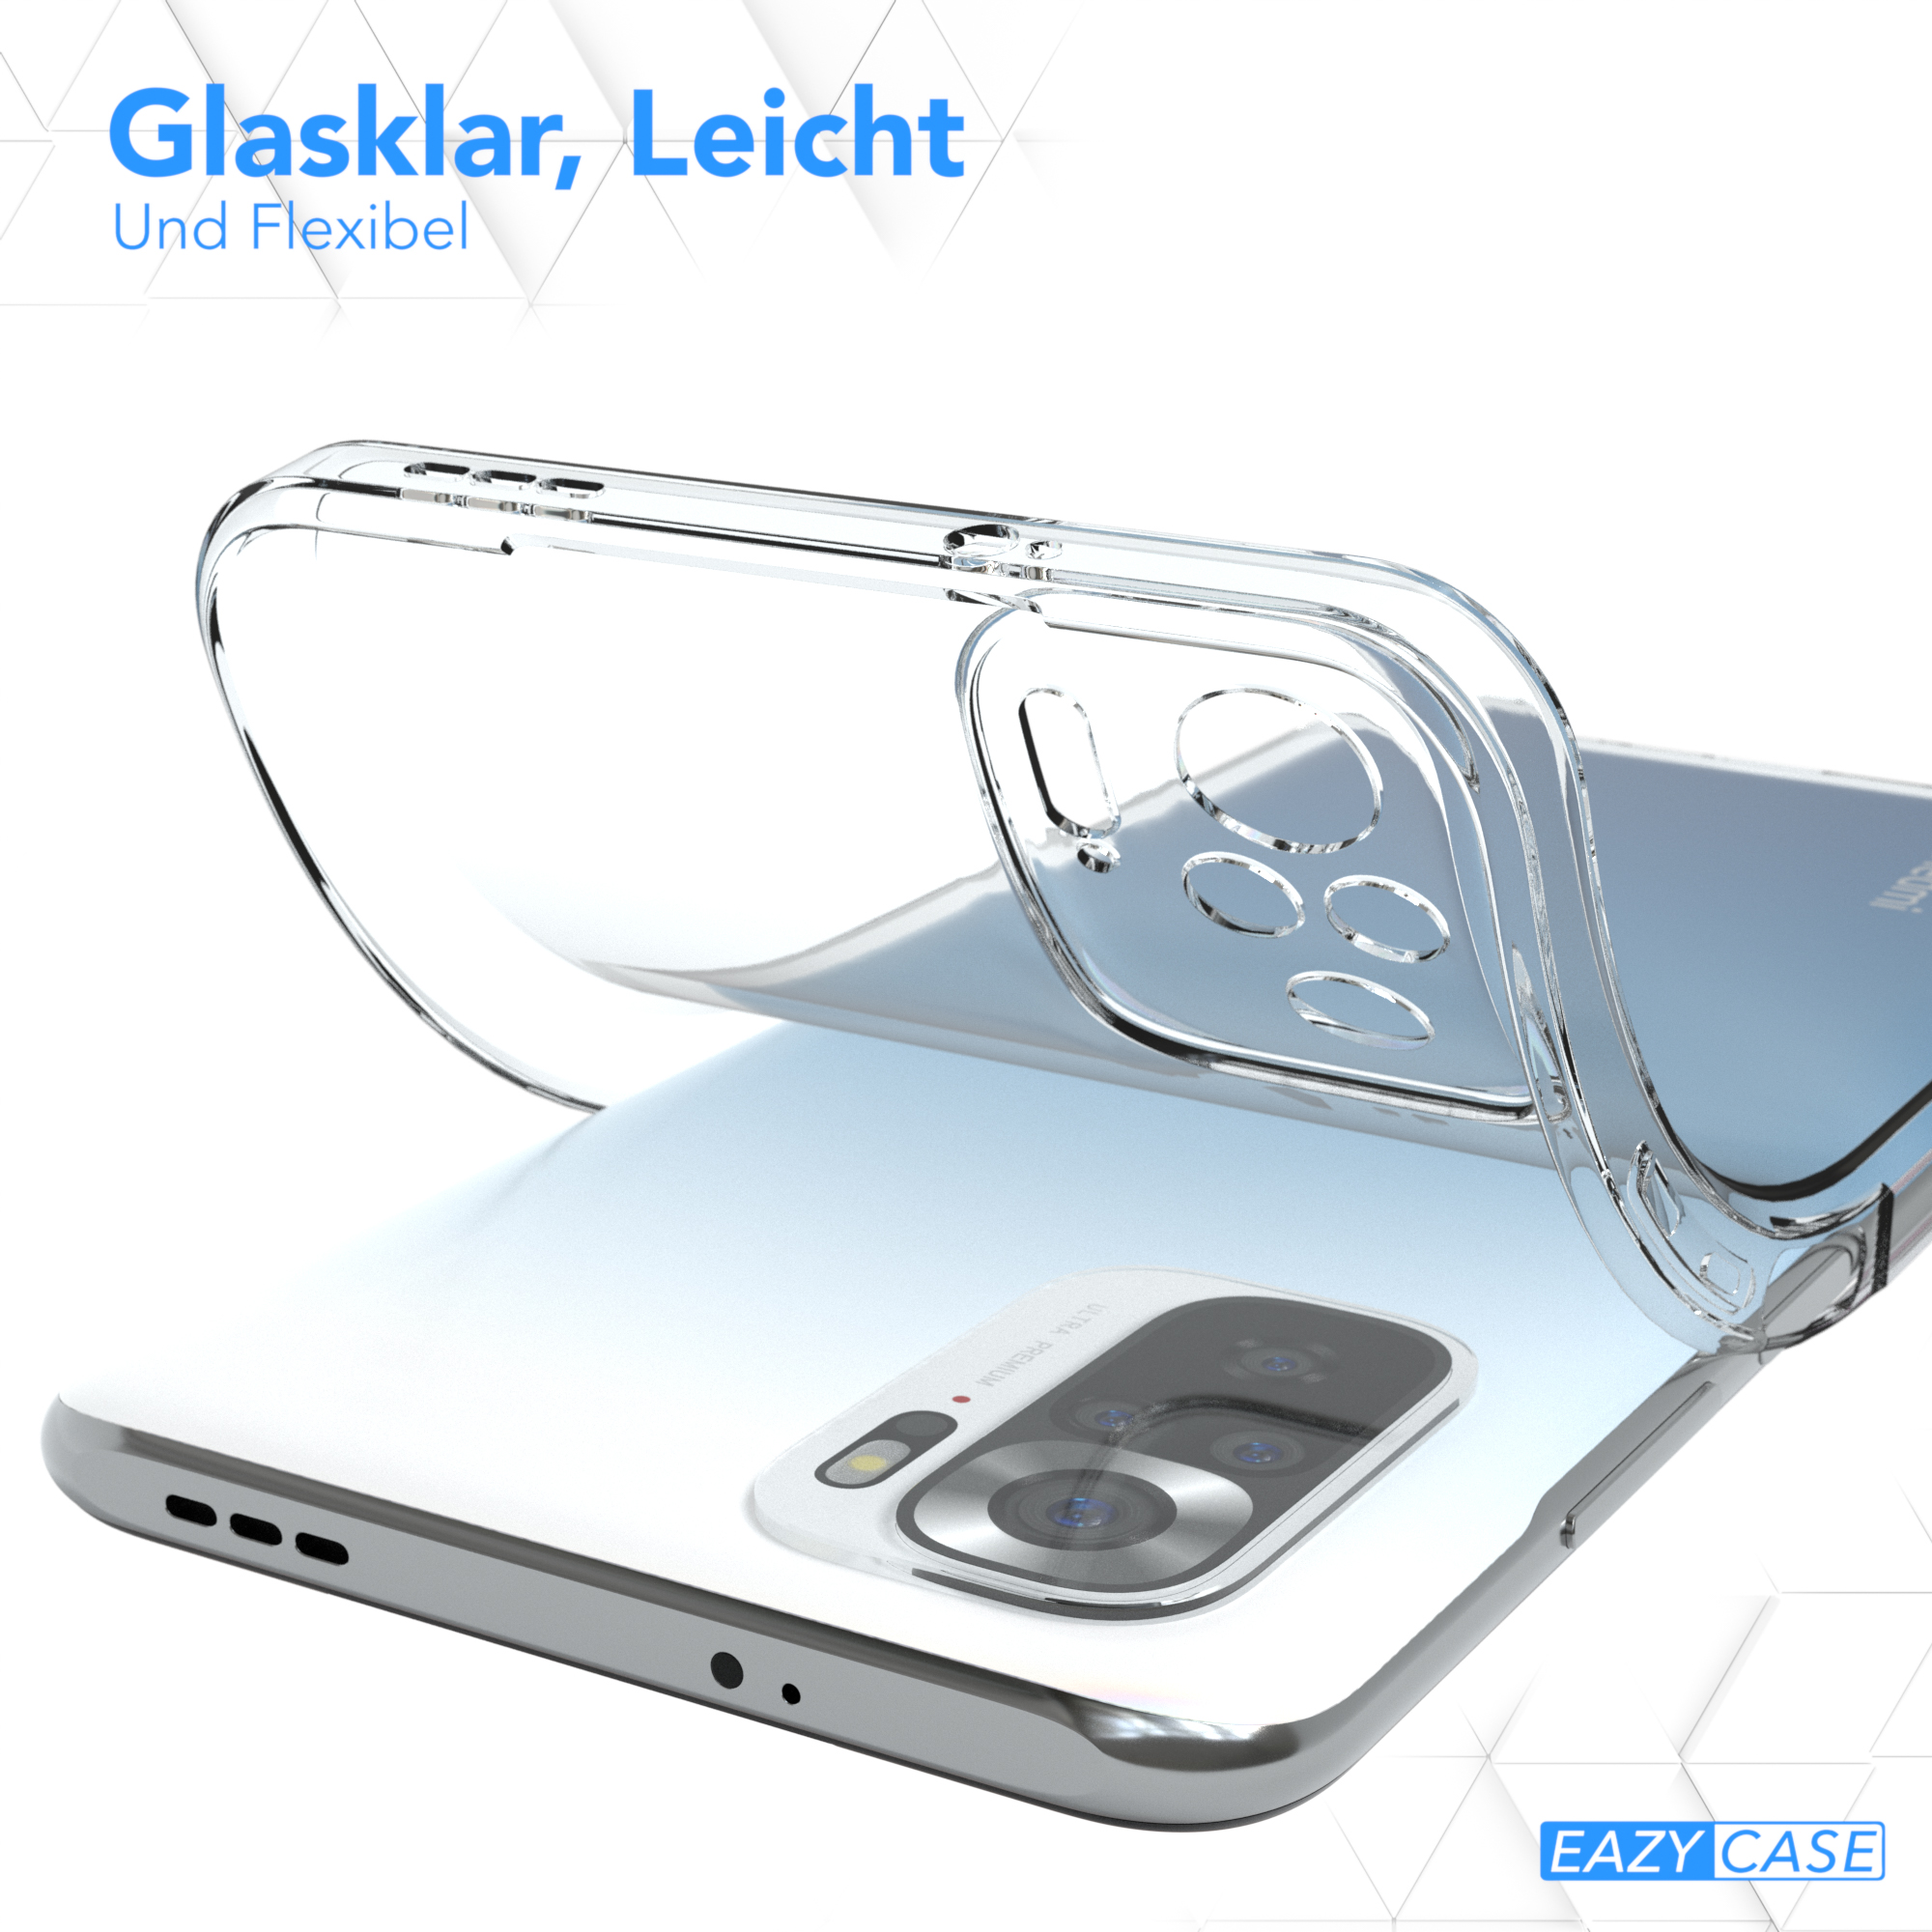 Backcover, 10S, Durchsichtig / Redmi Note Clear, EAZY Slimcover 10 Xiaomi, CASE